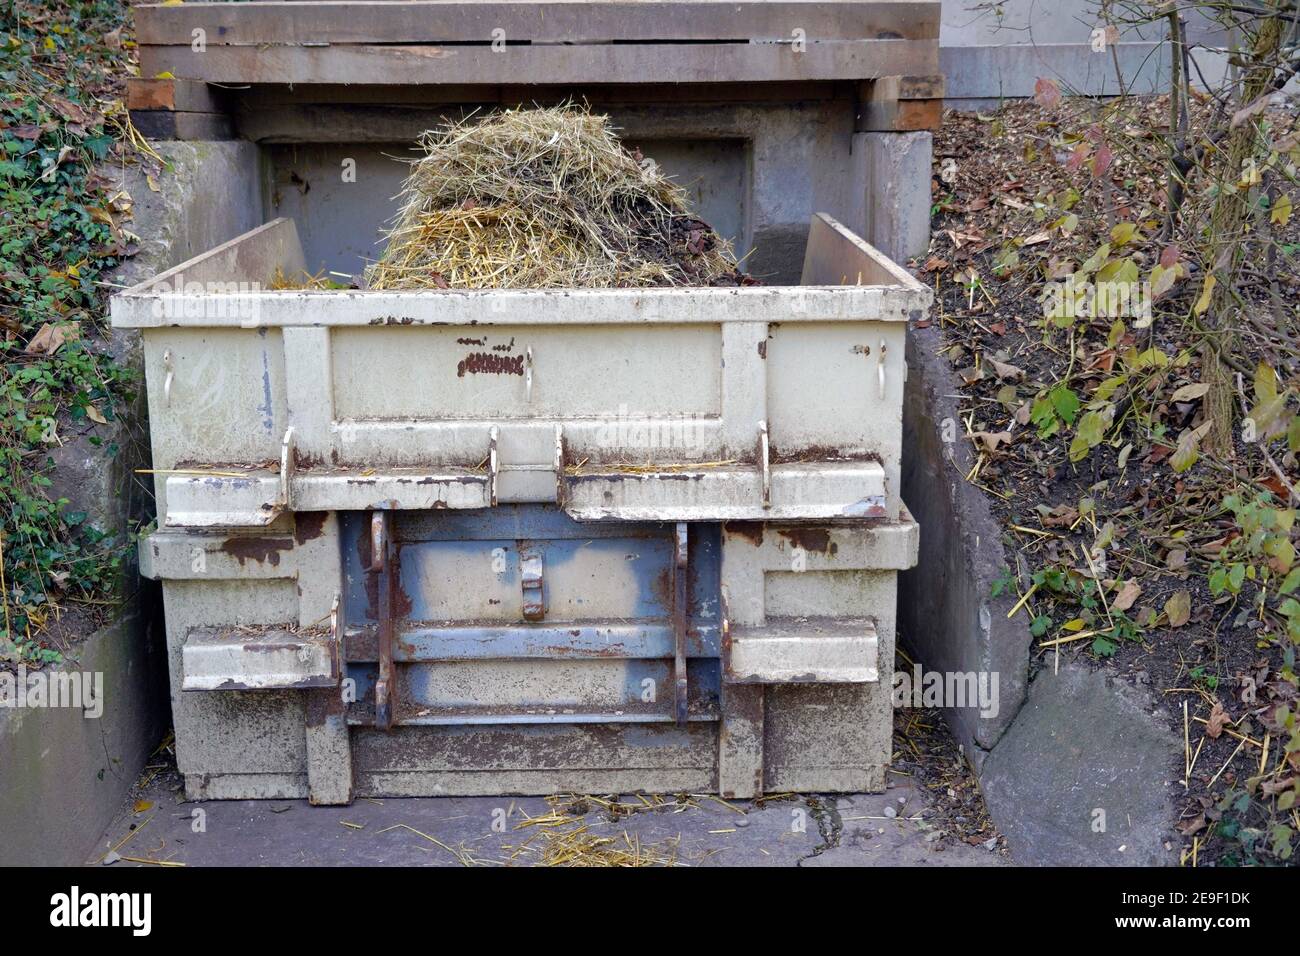 Container full of animal manure collected in a zoo. It shows the care for healthy environment and well being of animals, to keep them healthy. Stock Photo